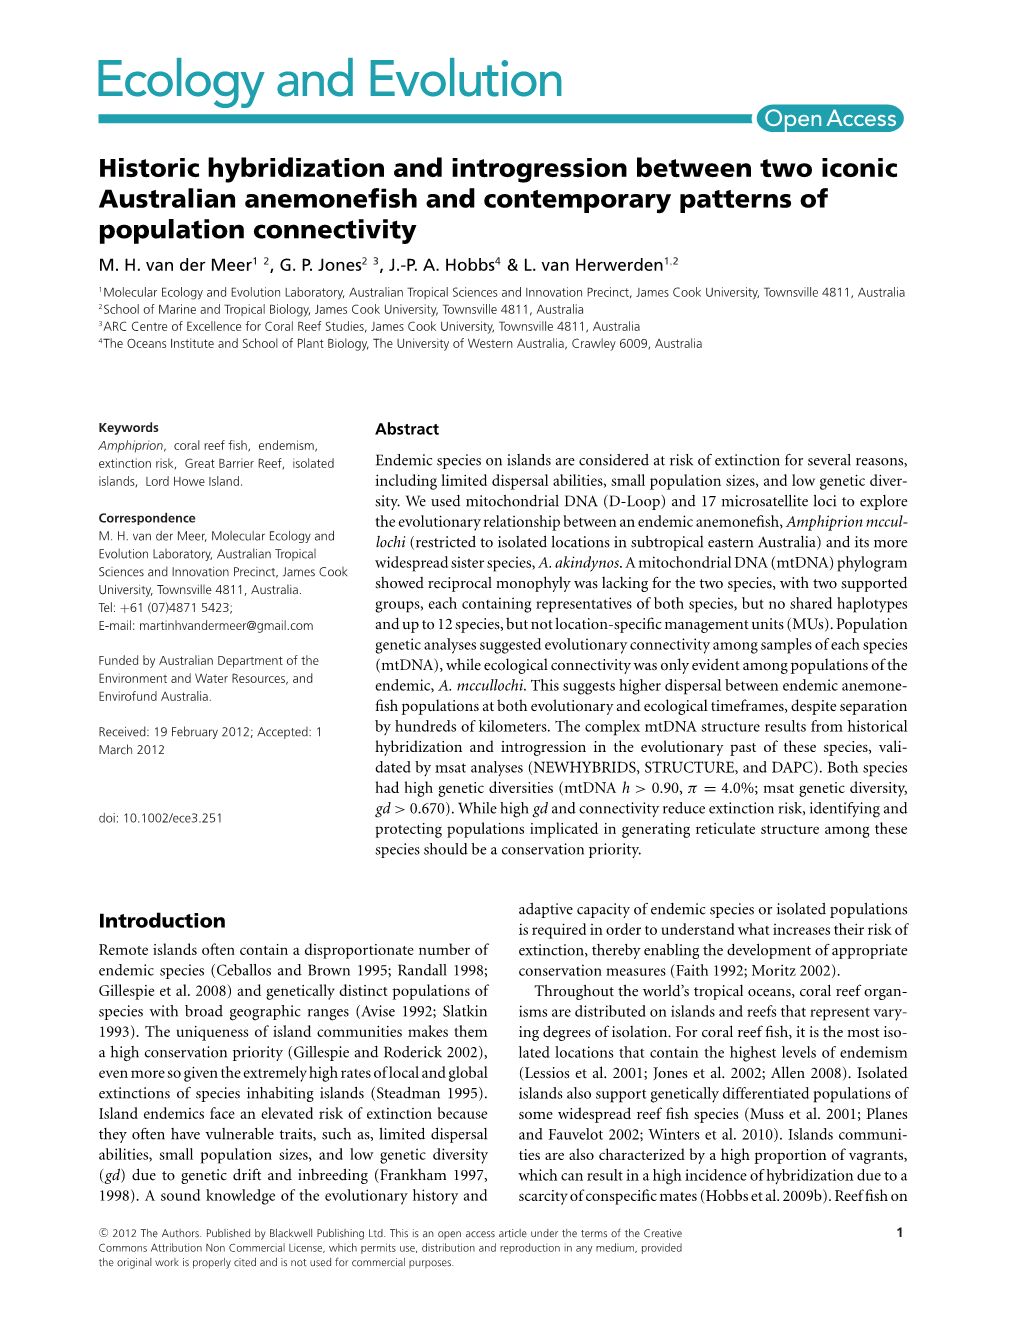 Historic Hybridization and Introgression Between Two Iconic Australian Anemoneﬁsh and Contemporary Patterns of Population Connectivity M